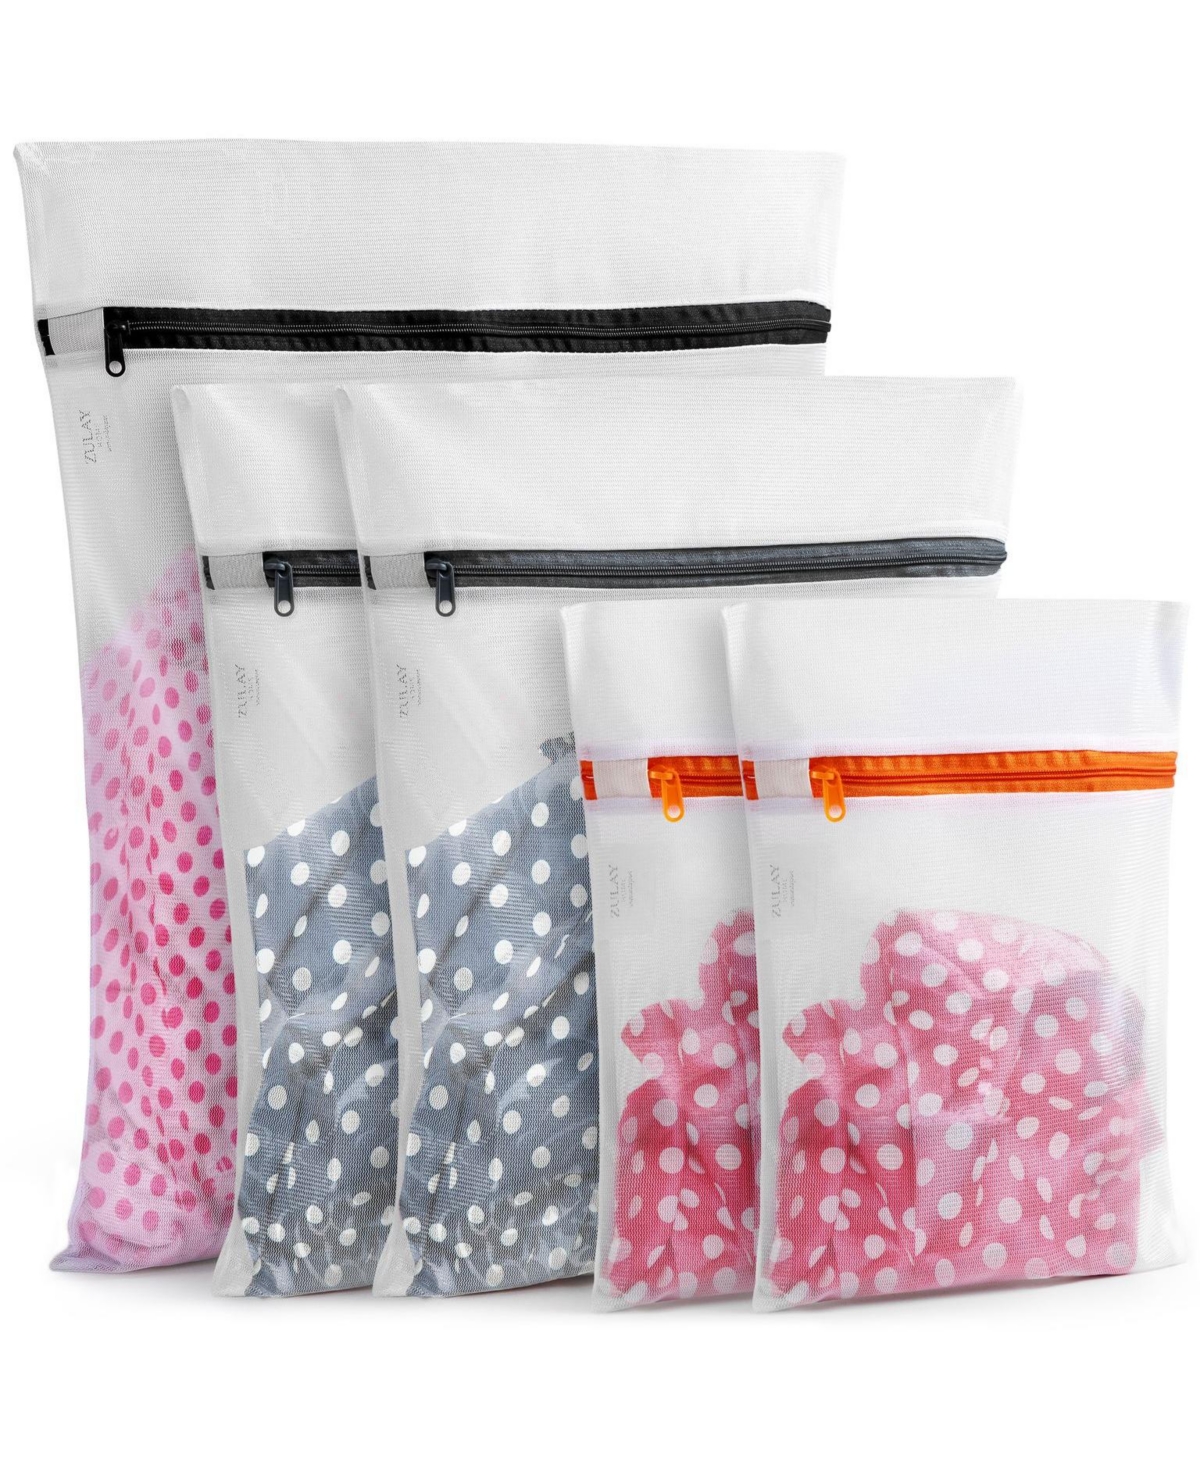 5 Pack Mix Size Reusable Mesh Laundry Bags for Delicates and Washing Machine (2 Small, 2 Medium, 1 Large) - Assorted